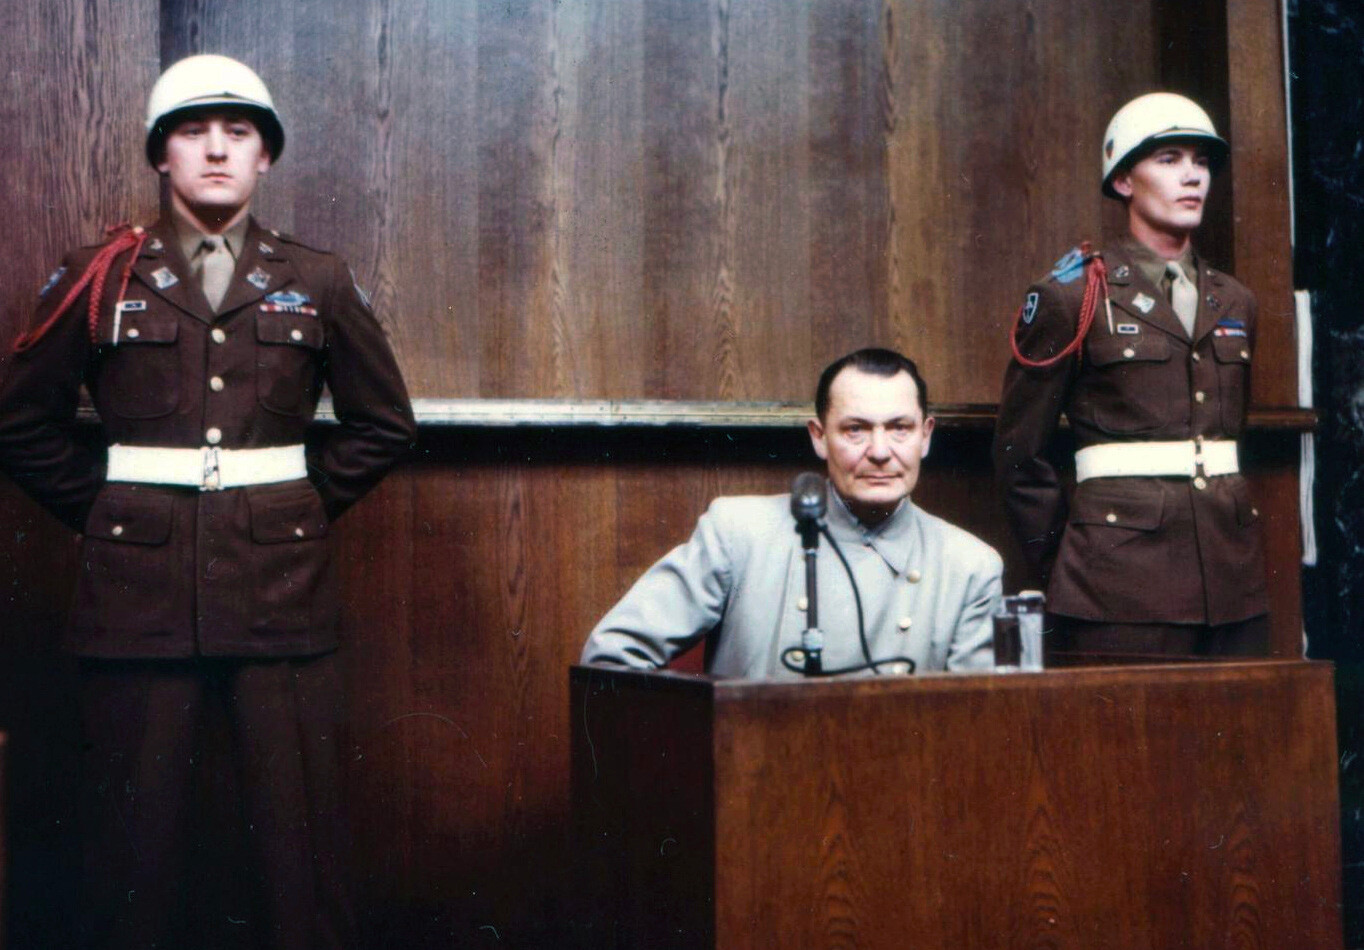 Hermann Göring during cross examination at his trial for war crimes, 1946